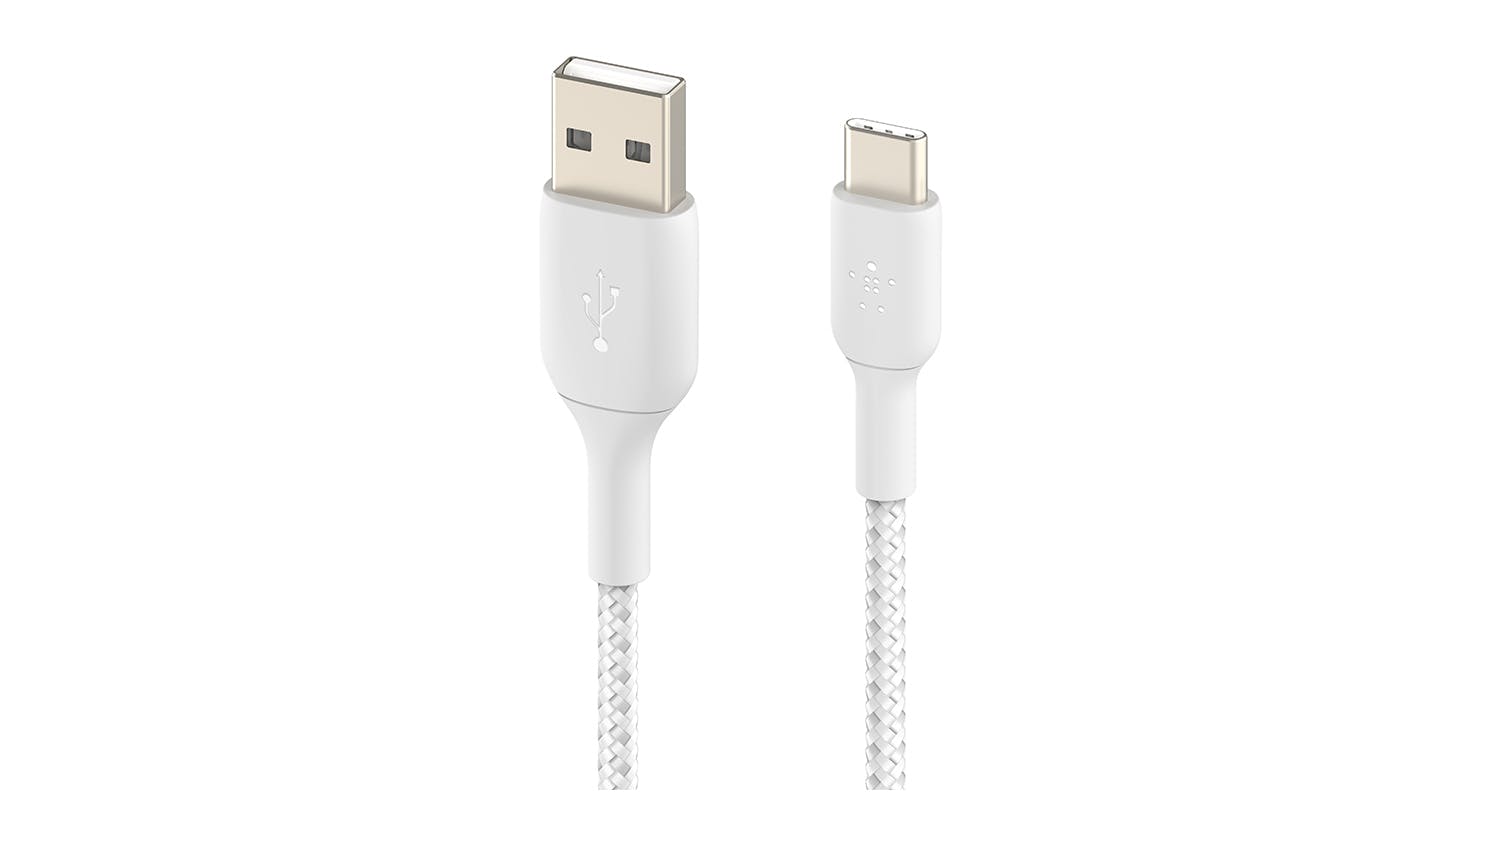 Belkin Boost Up Charge USB-A to USB-C Braided Cable 2m - White